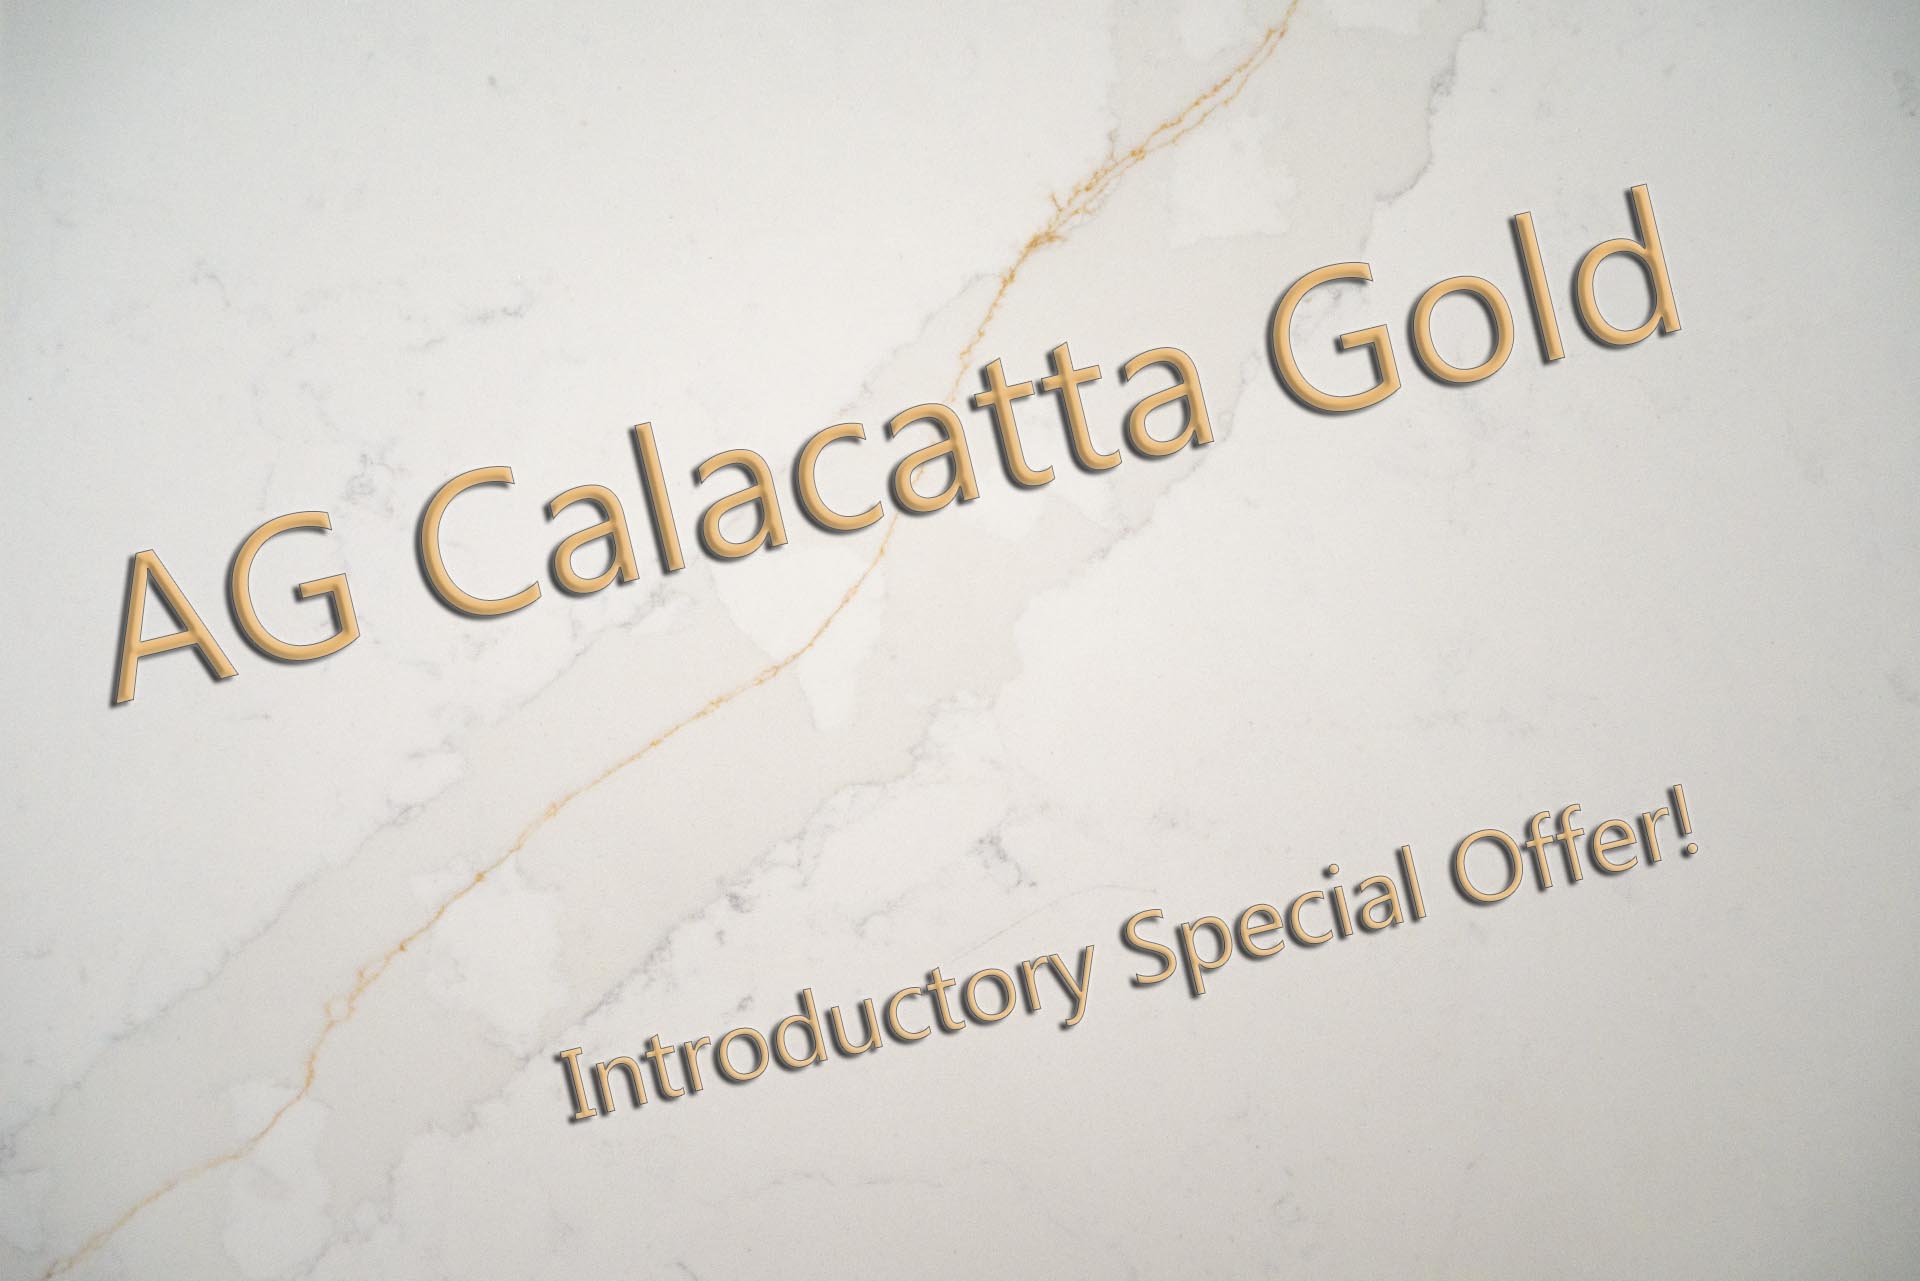 AG Calacatta Gold introductory Special Offer